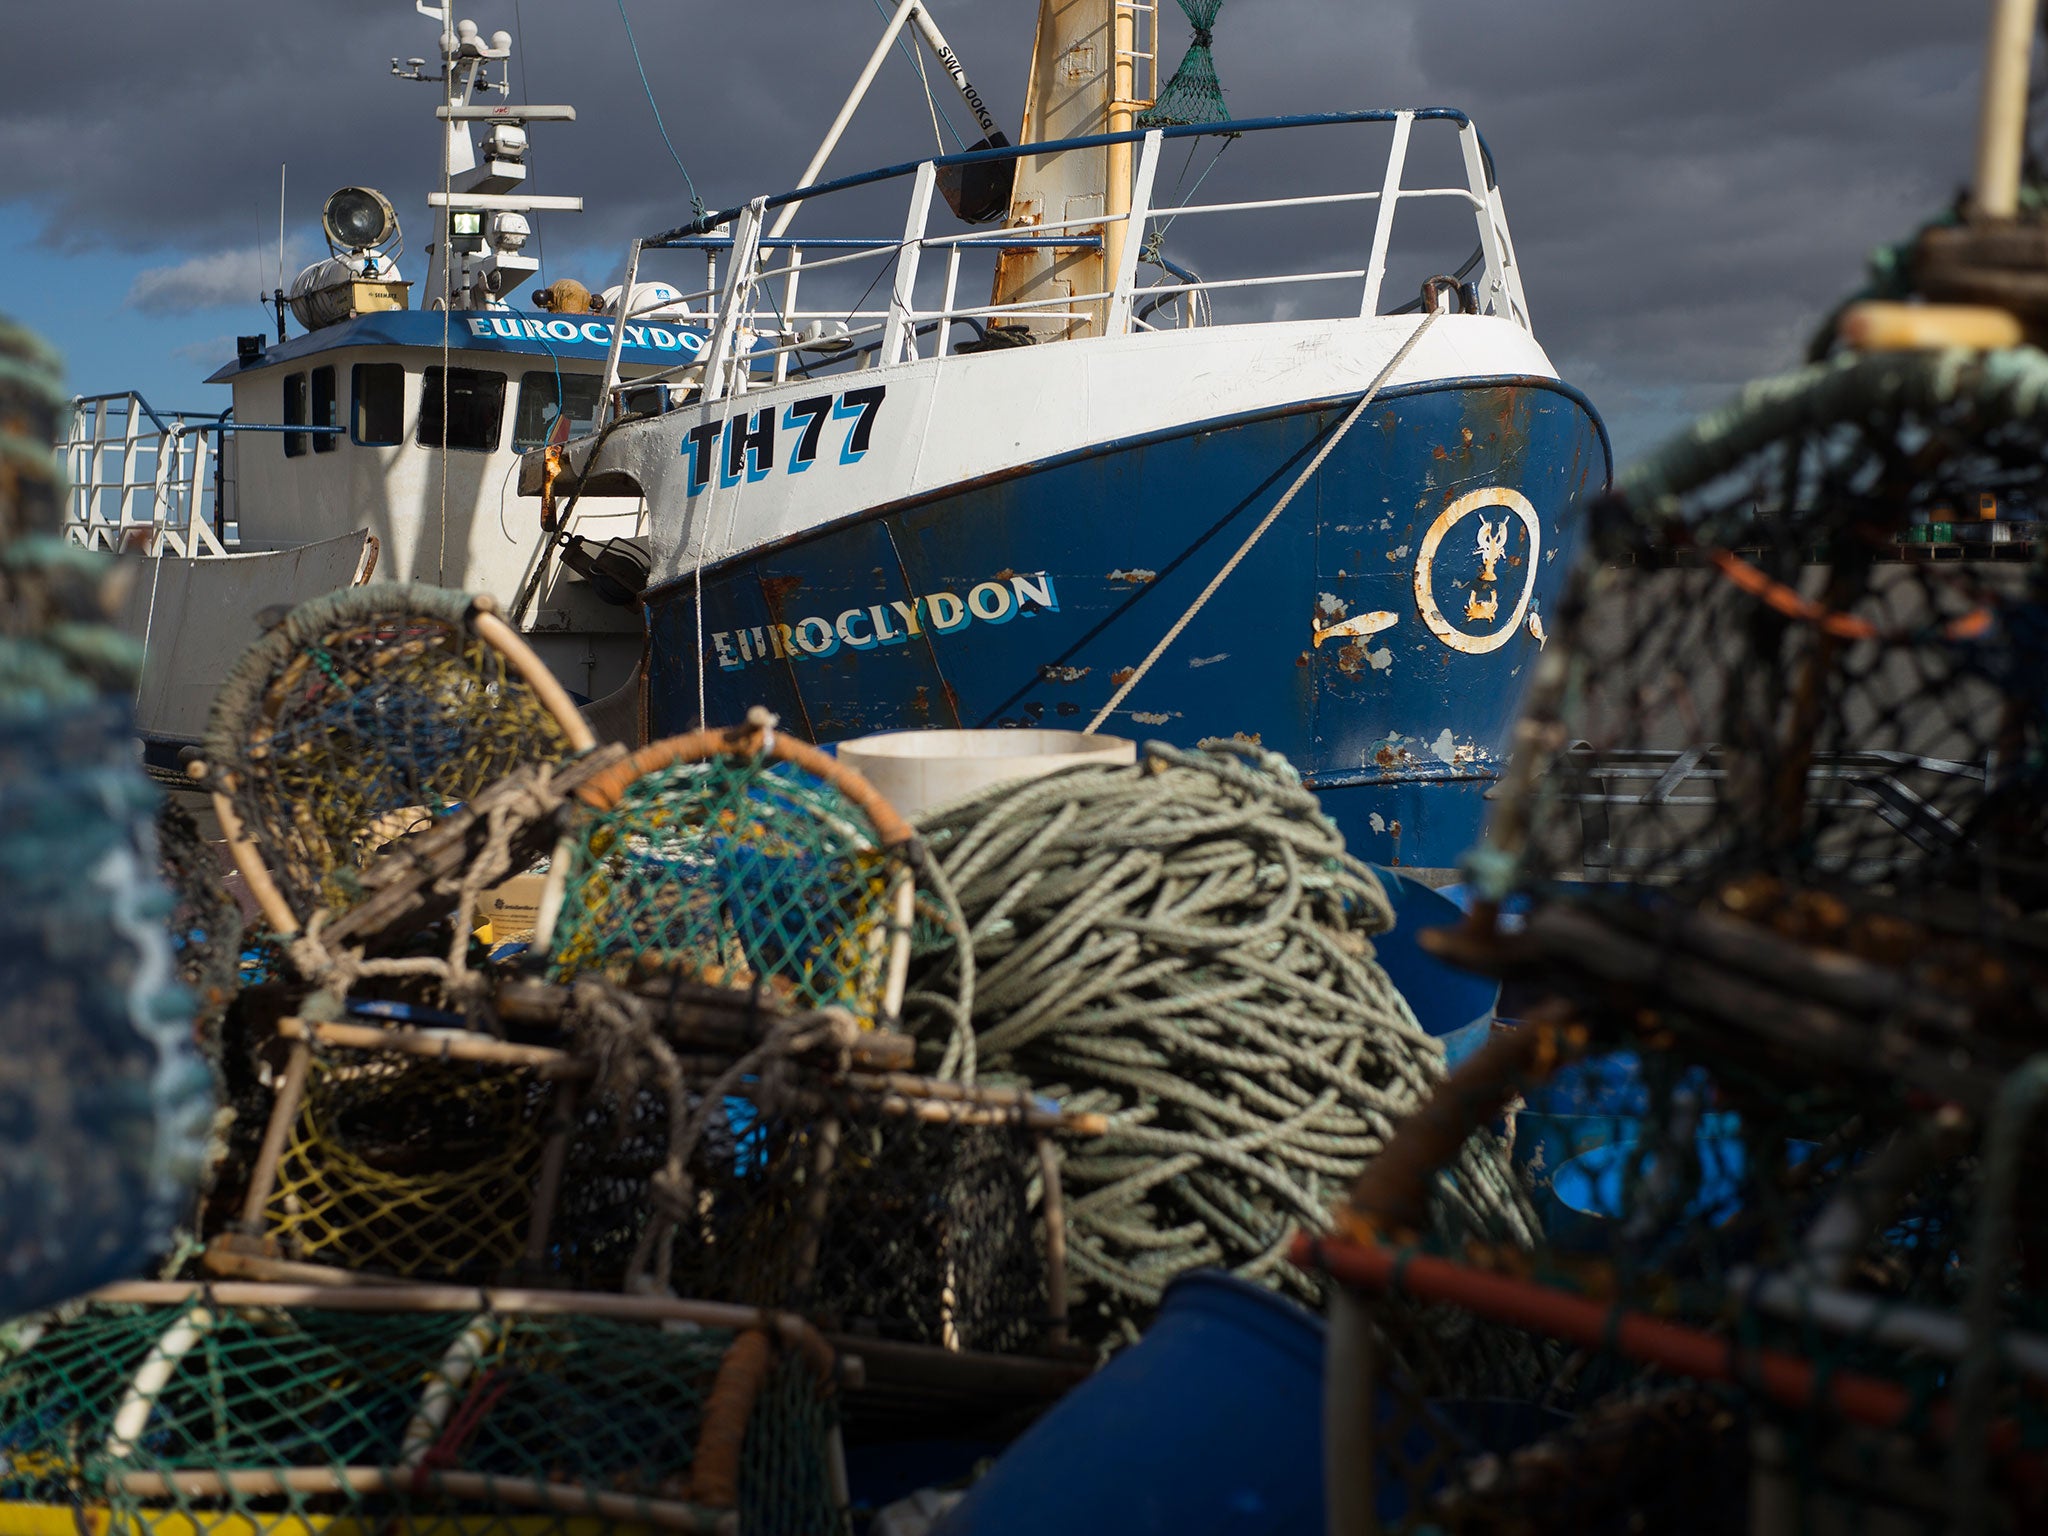 A Grimsby trawler: outside the South-east the economy is weak